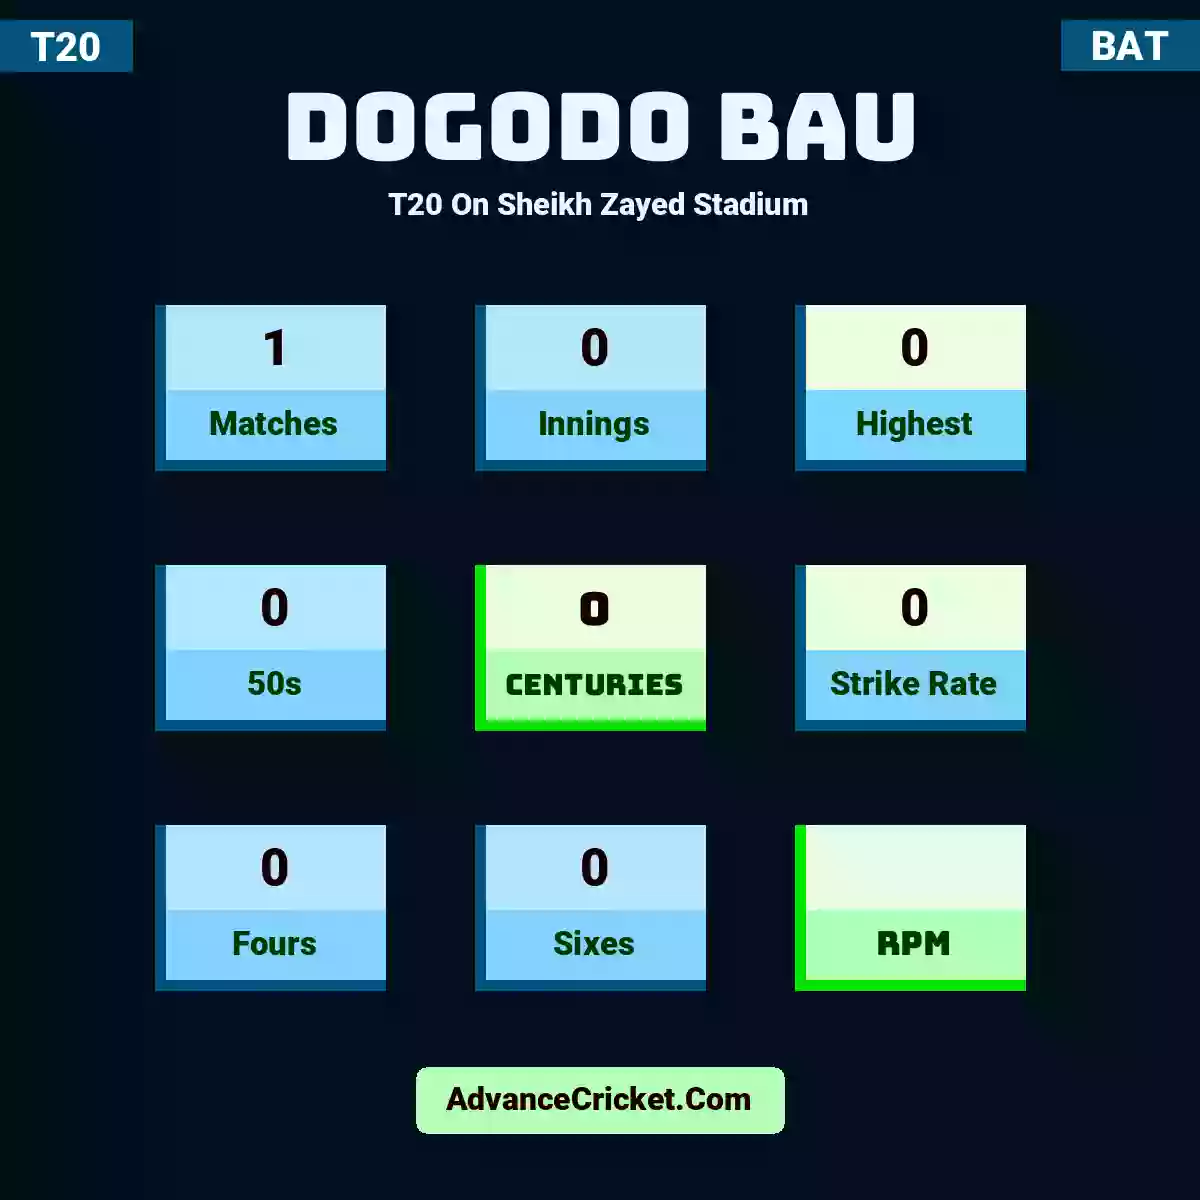 Dogodo Bau T20  On Sheikh Zayed Stadium, Dogodo Bau played 1 matches, scored 0 runs as highest, 0 half-centuries, and 0 centuries, with a strike rate of 0. D.Bau hit 0 fours and 0 sixes.